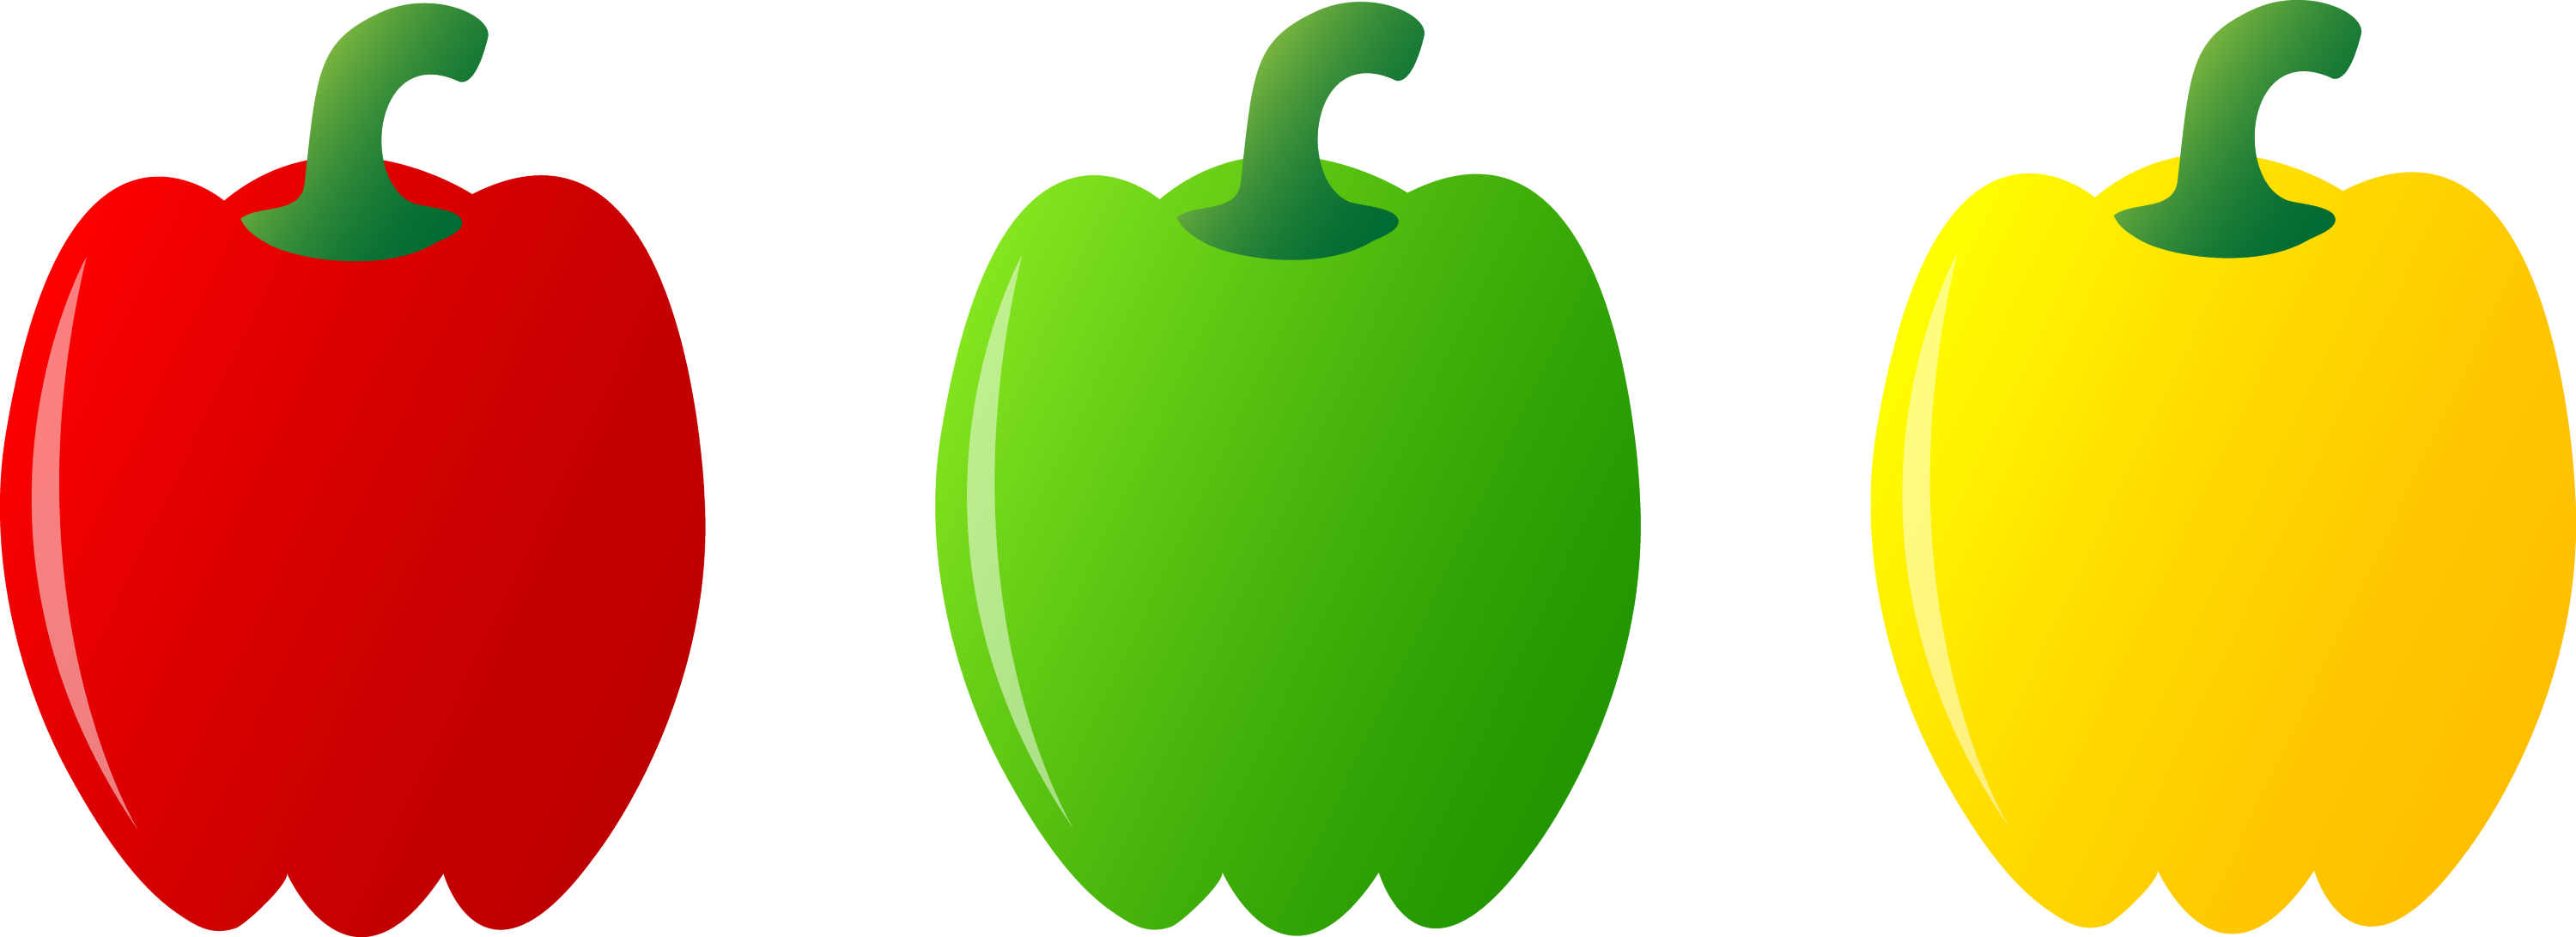 clipart of green peppers - photo #17